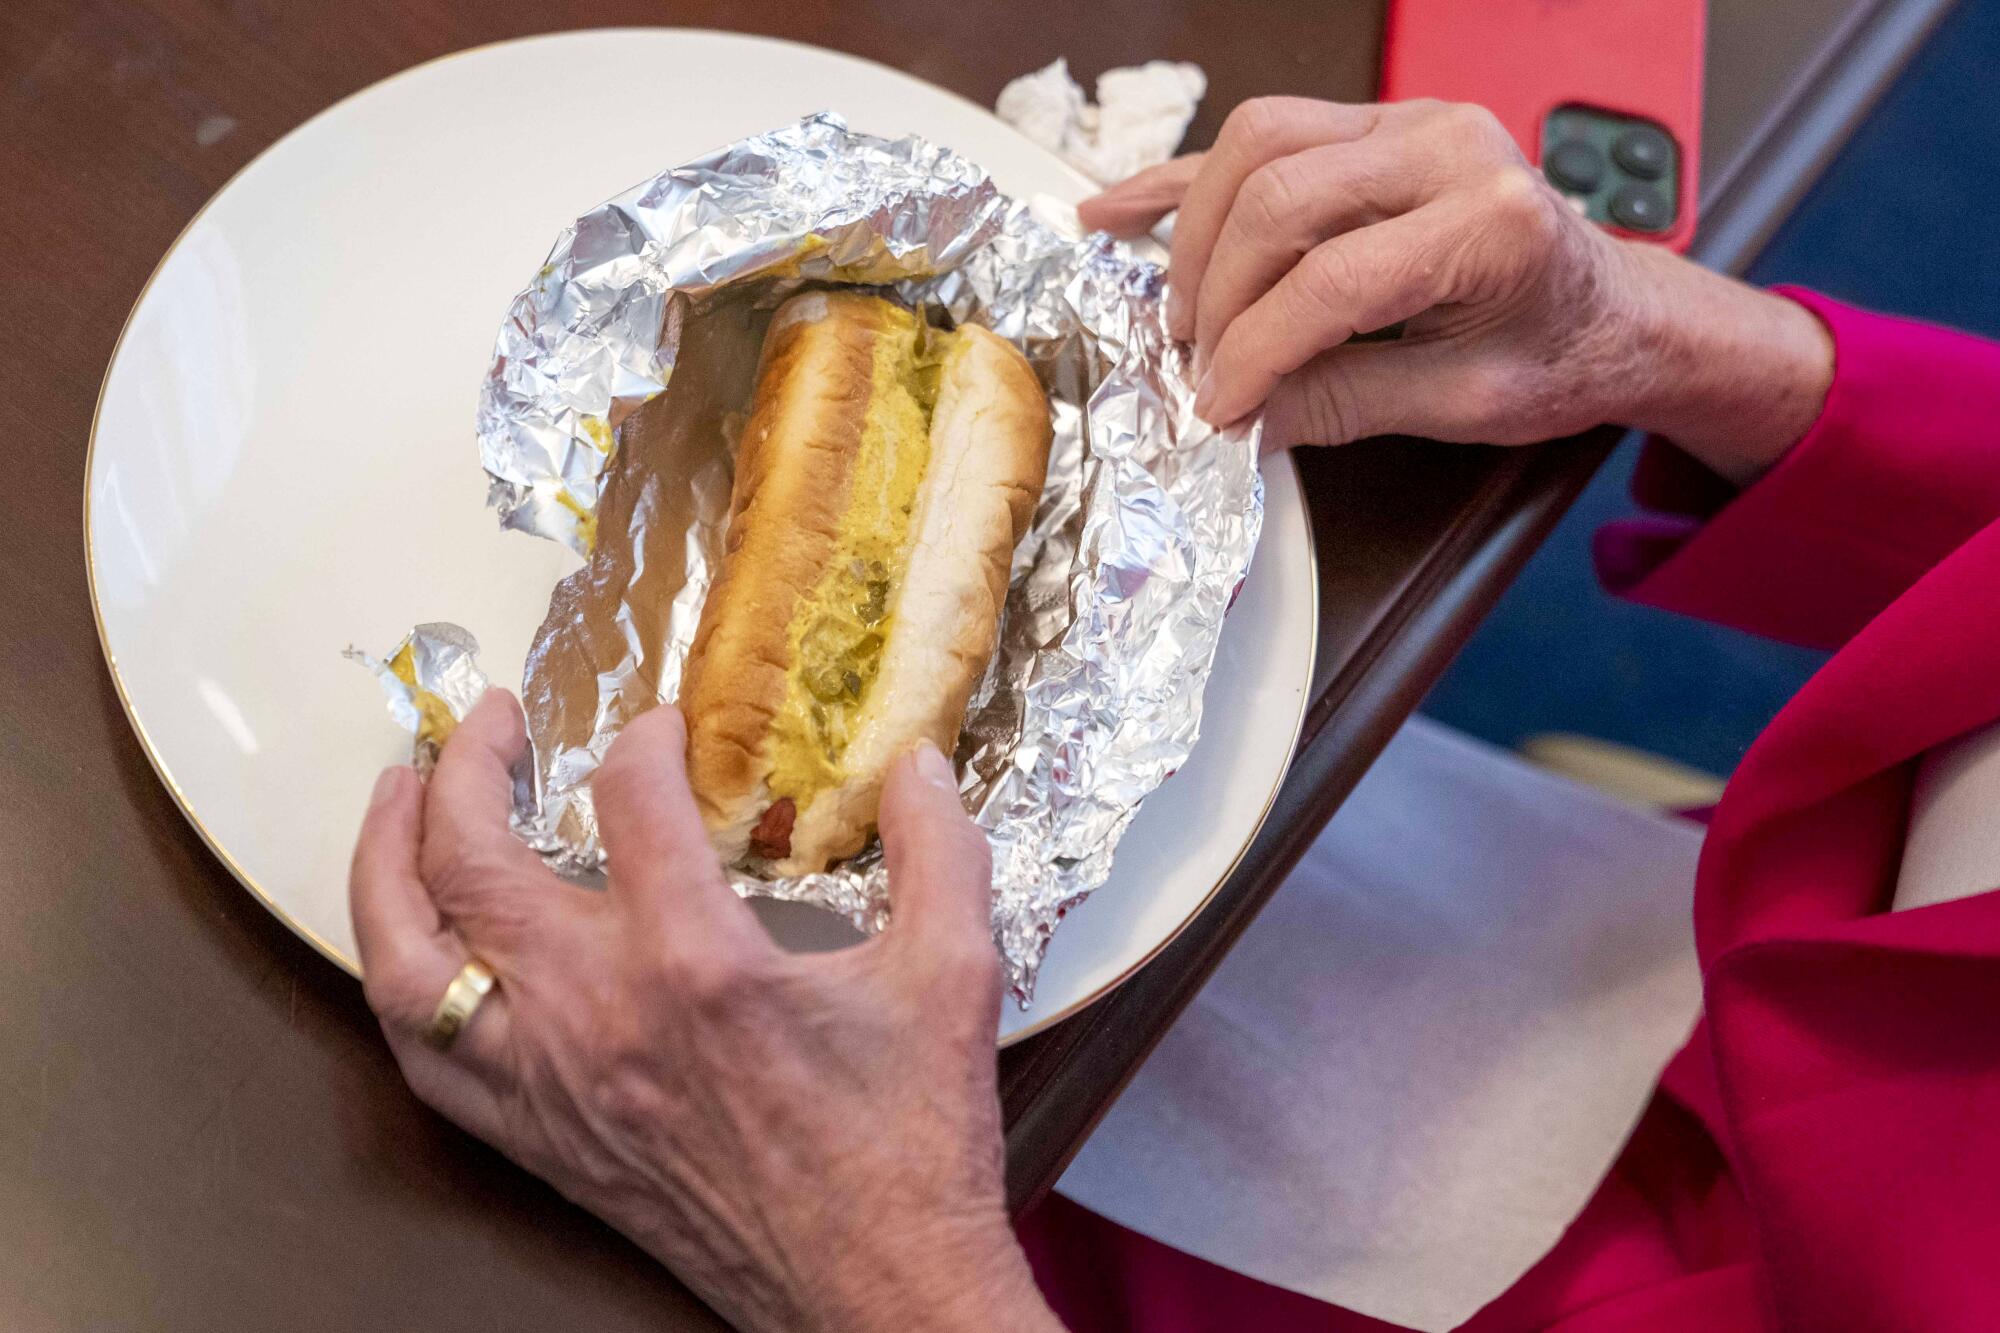 Nancy Pelosi opens a hot dog with mustard and relish for lunch in her hideaway.